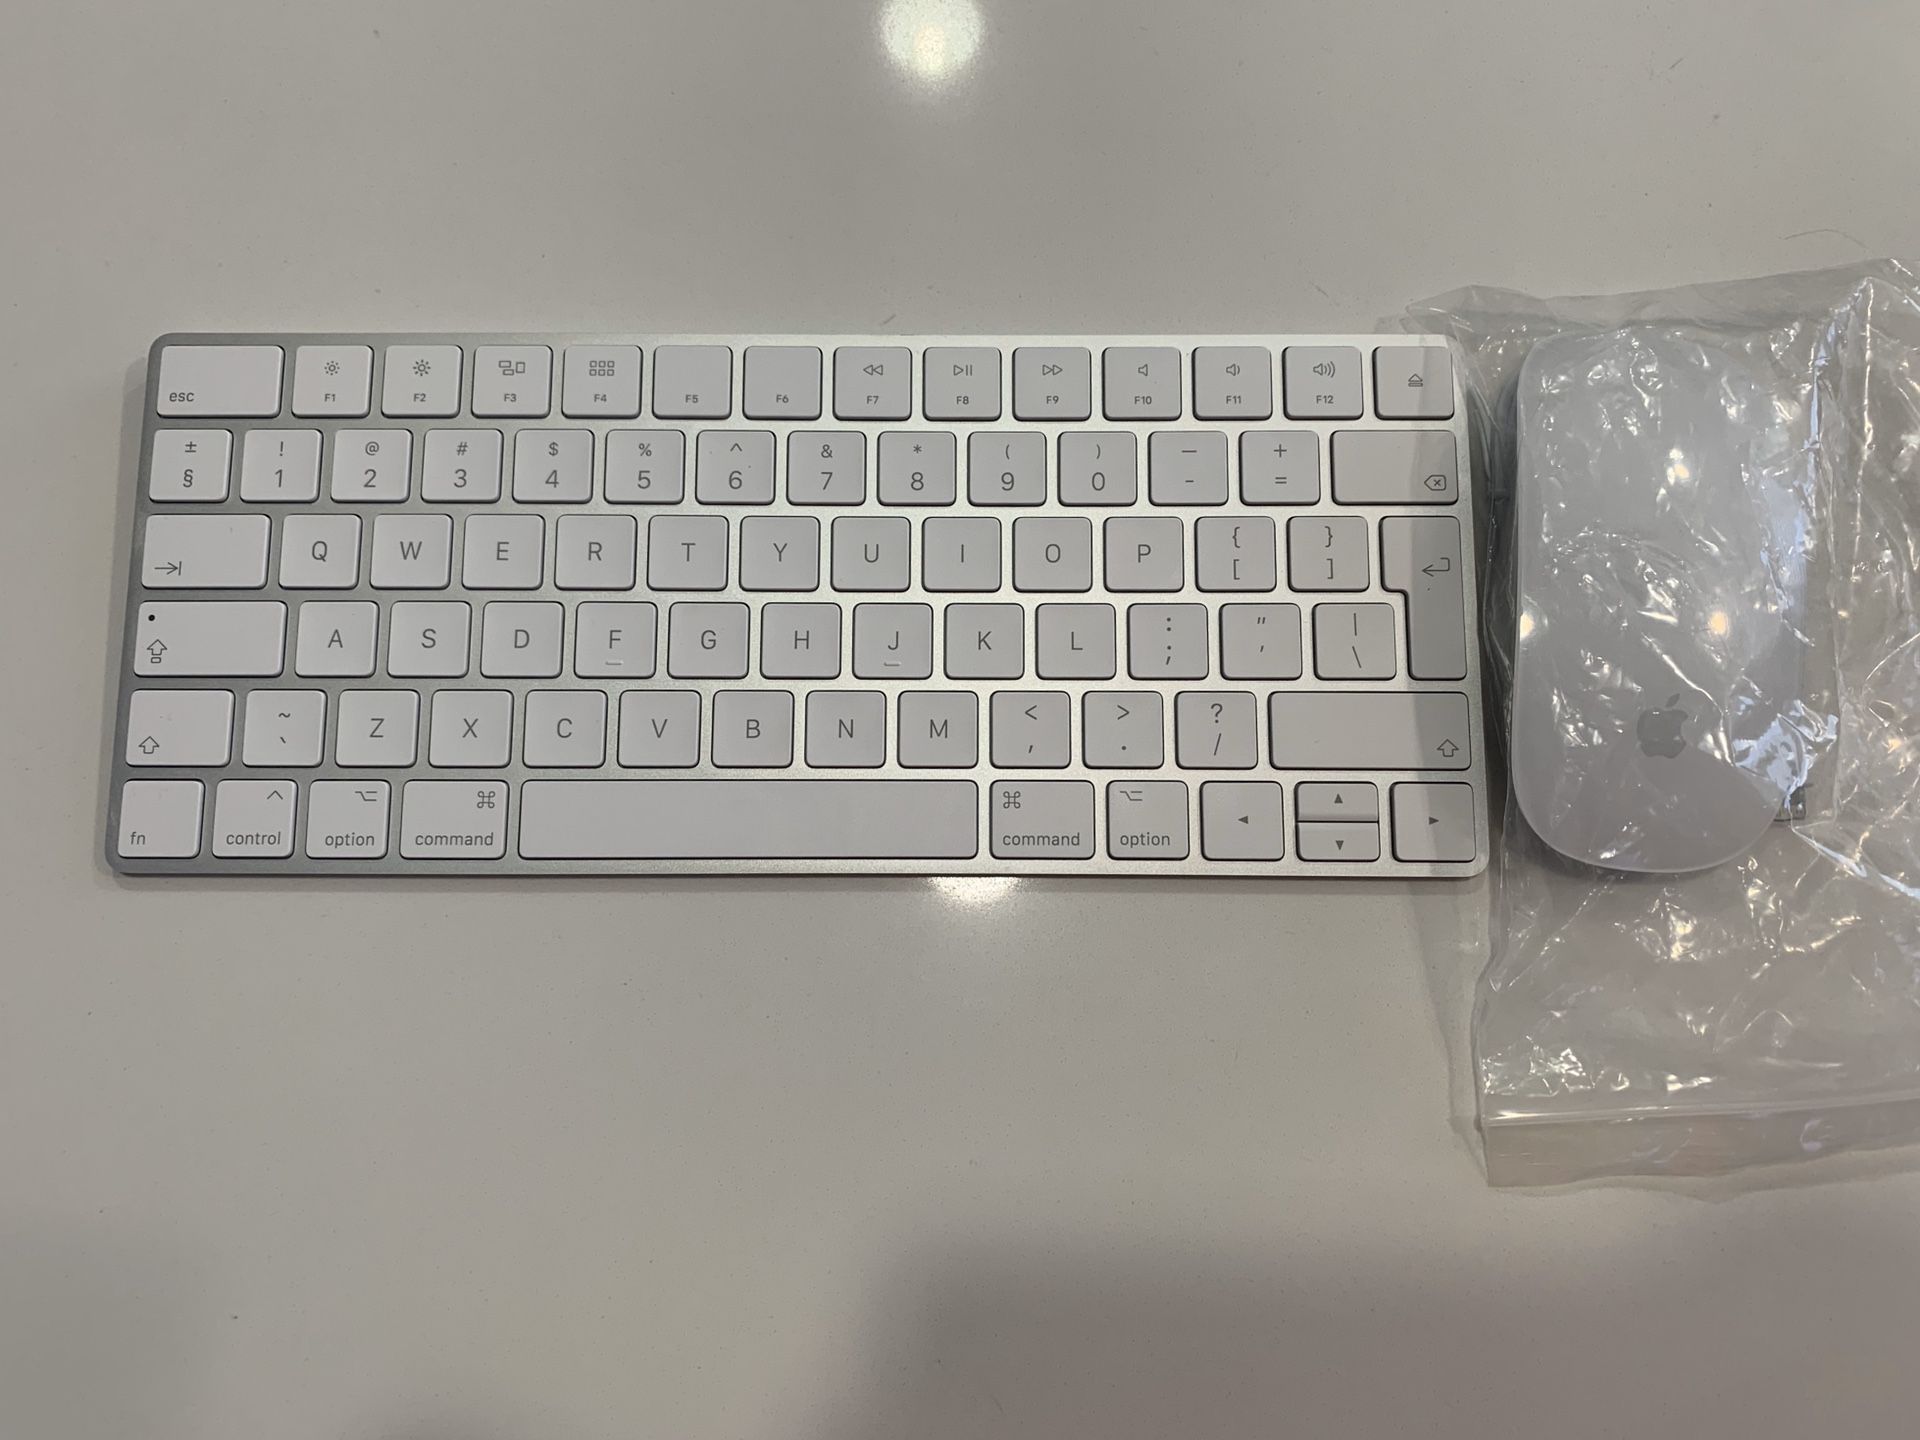 NEW Genuine Apple Wireless Magic Keyboard 2 MLA22LL/A and Magic Mouse 2MLA02LL/A Bundle for Computers, iPads, Apple TV NEW AppleModel: A1644, A1657